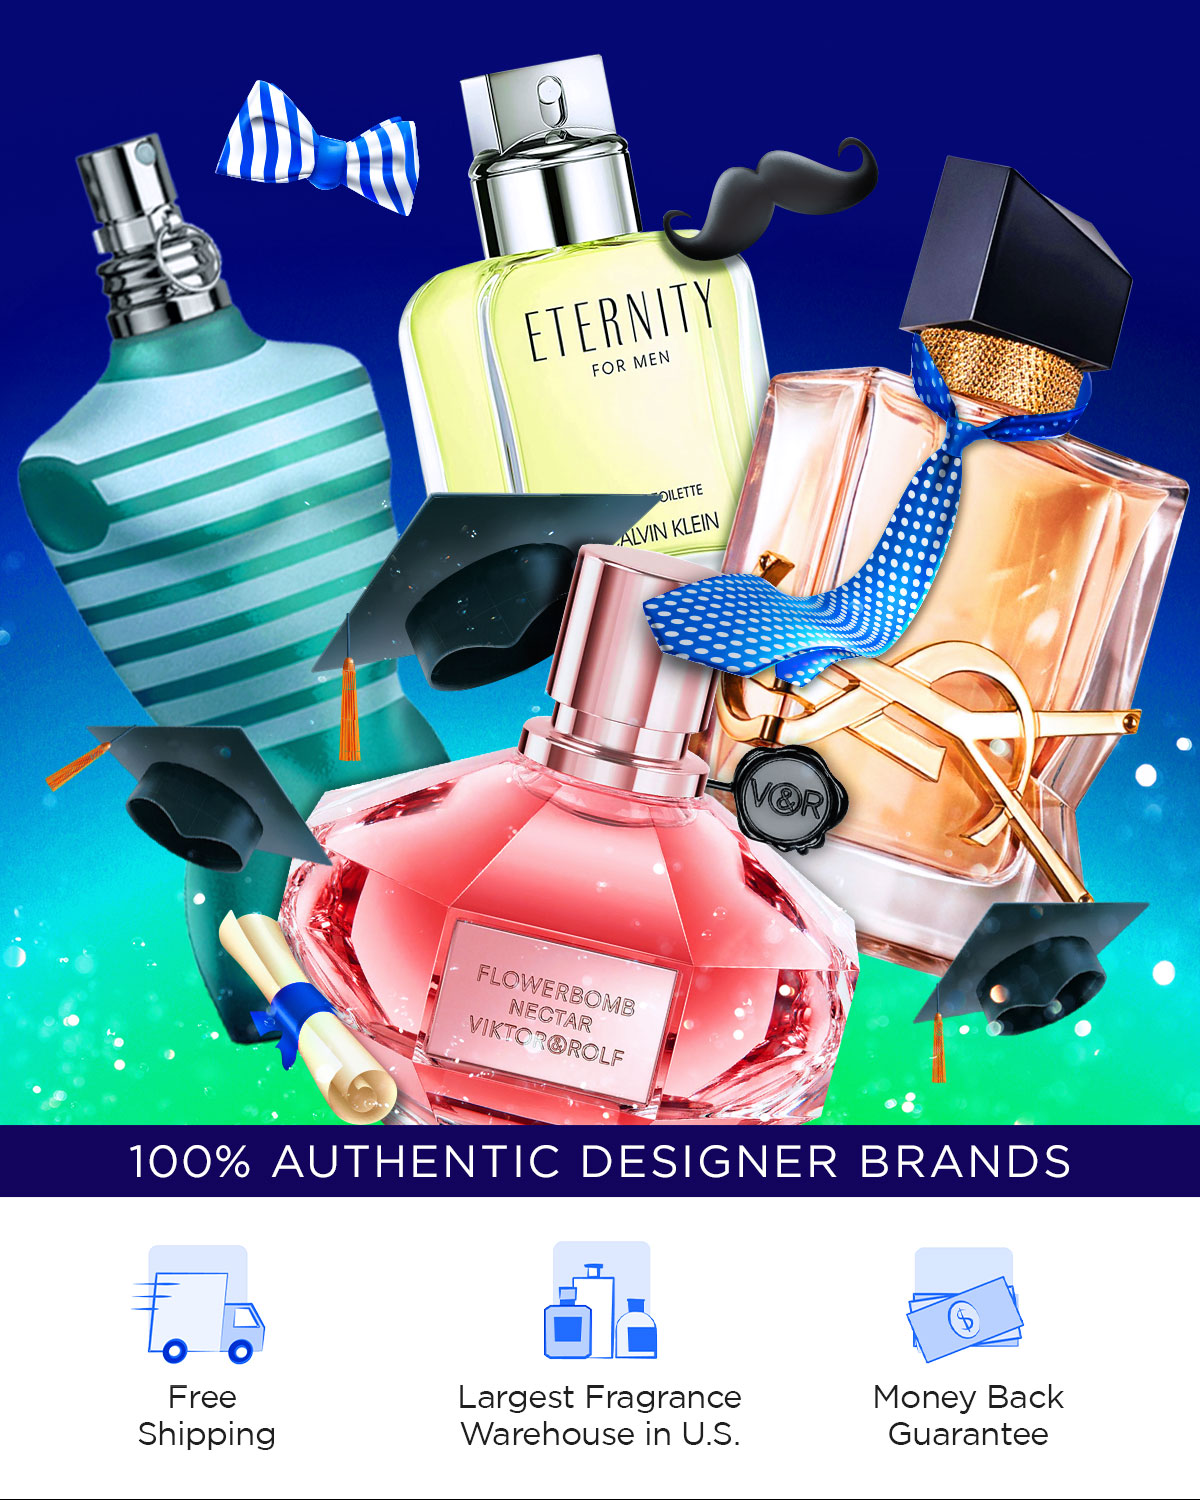 Graduation caps and accessories for dads fly around best selling fragrances during Dads & Grads deals